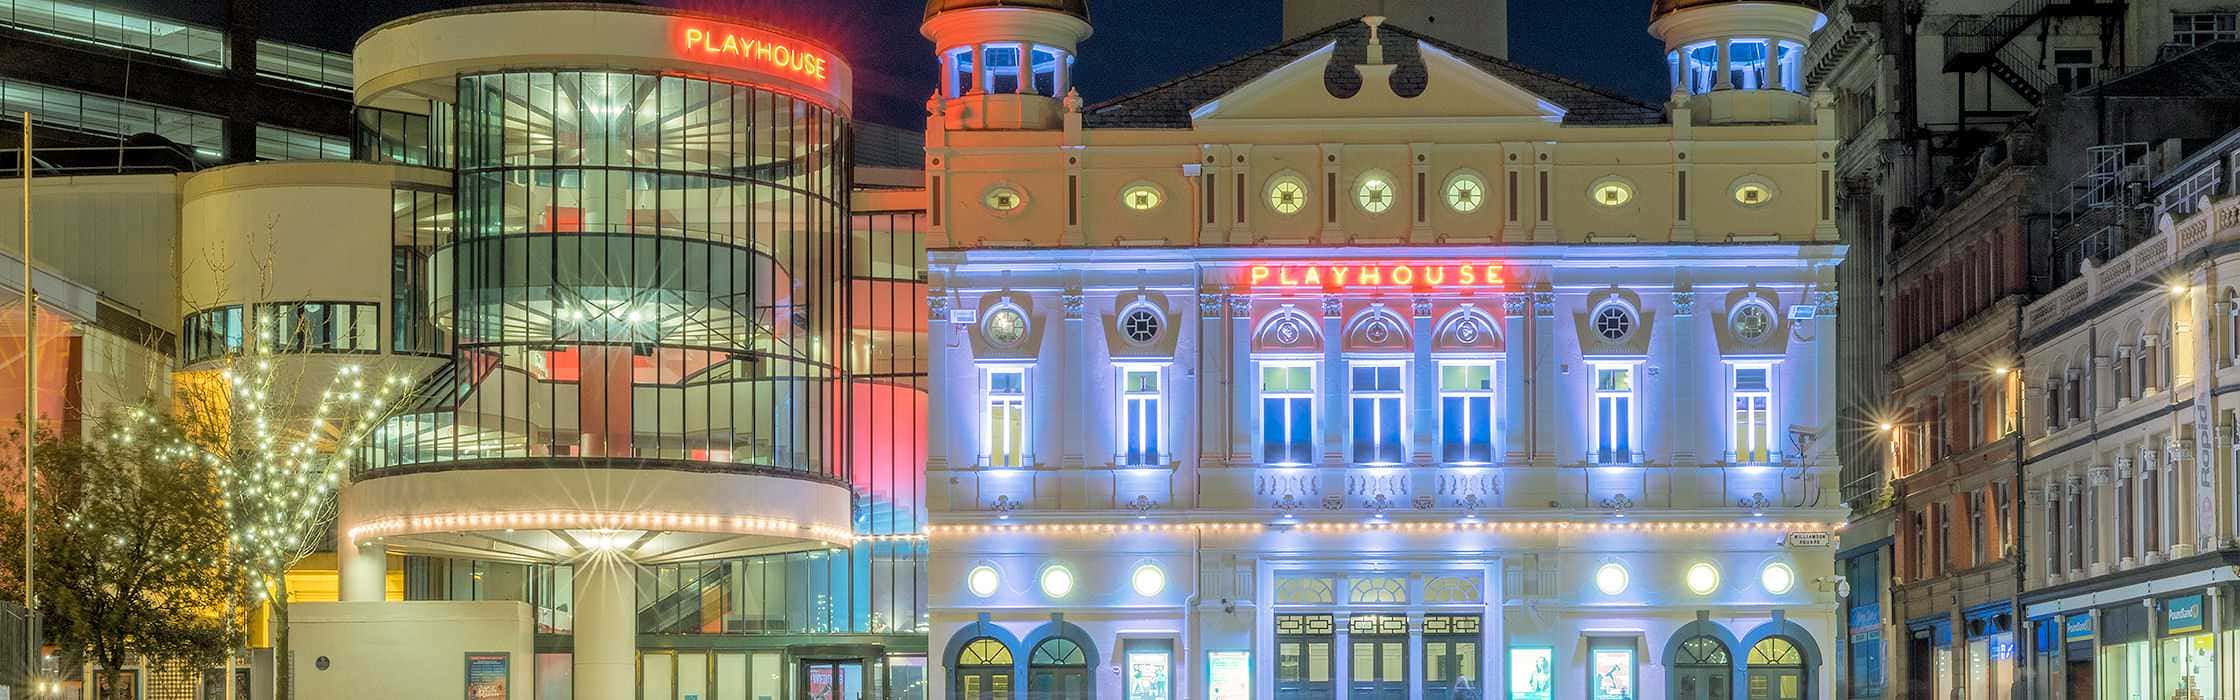 What's On at The Liverpool Playhouse, Liverpool